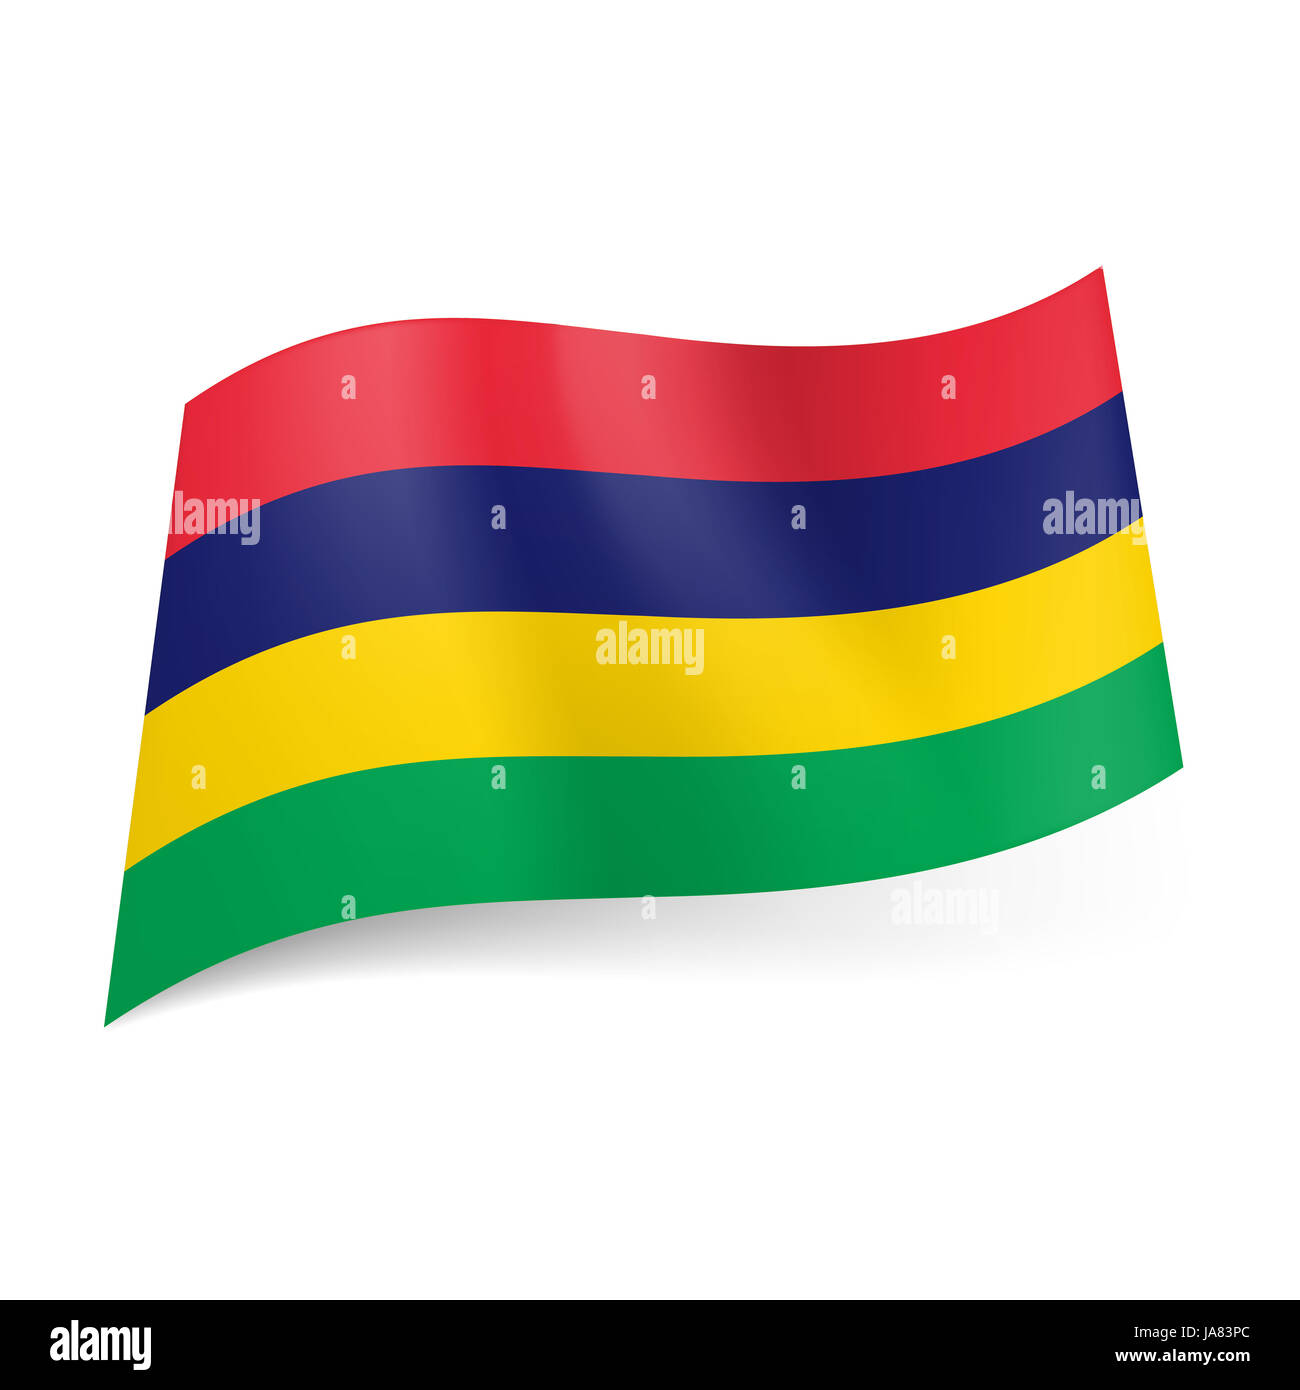 via hjælpe frost National flag of Mauritius: red, blue, yellow and green horizontal stripes  Stock Photo - Alamy